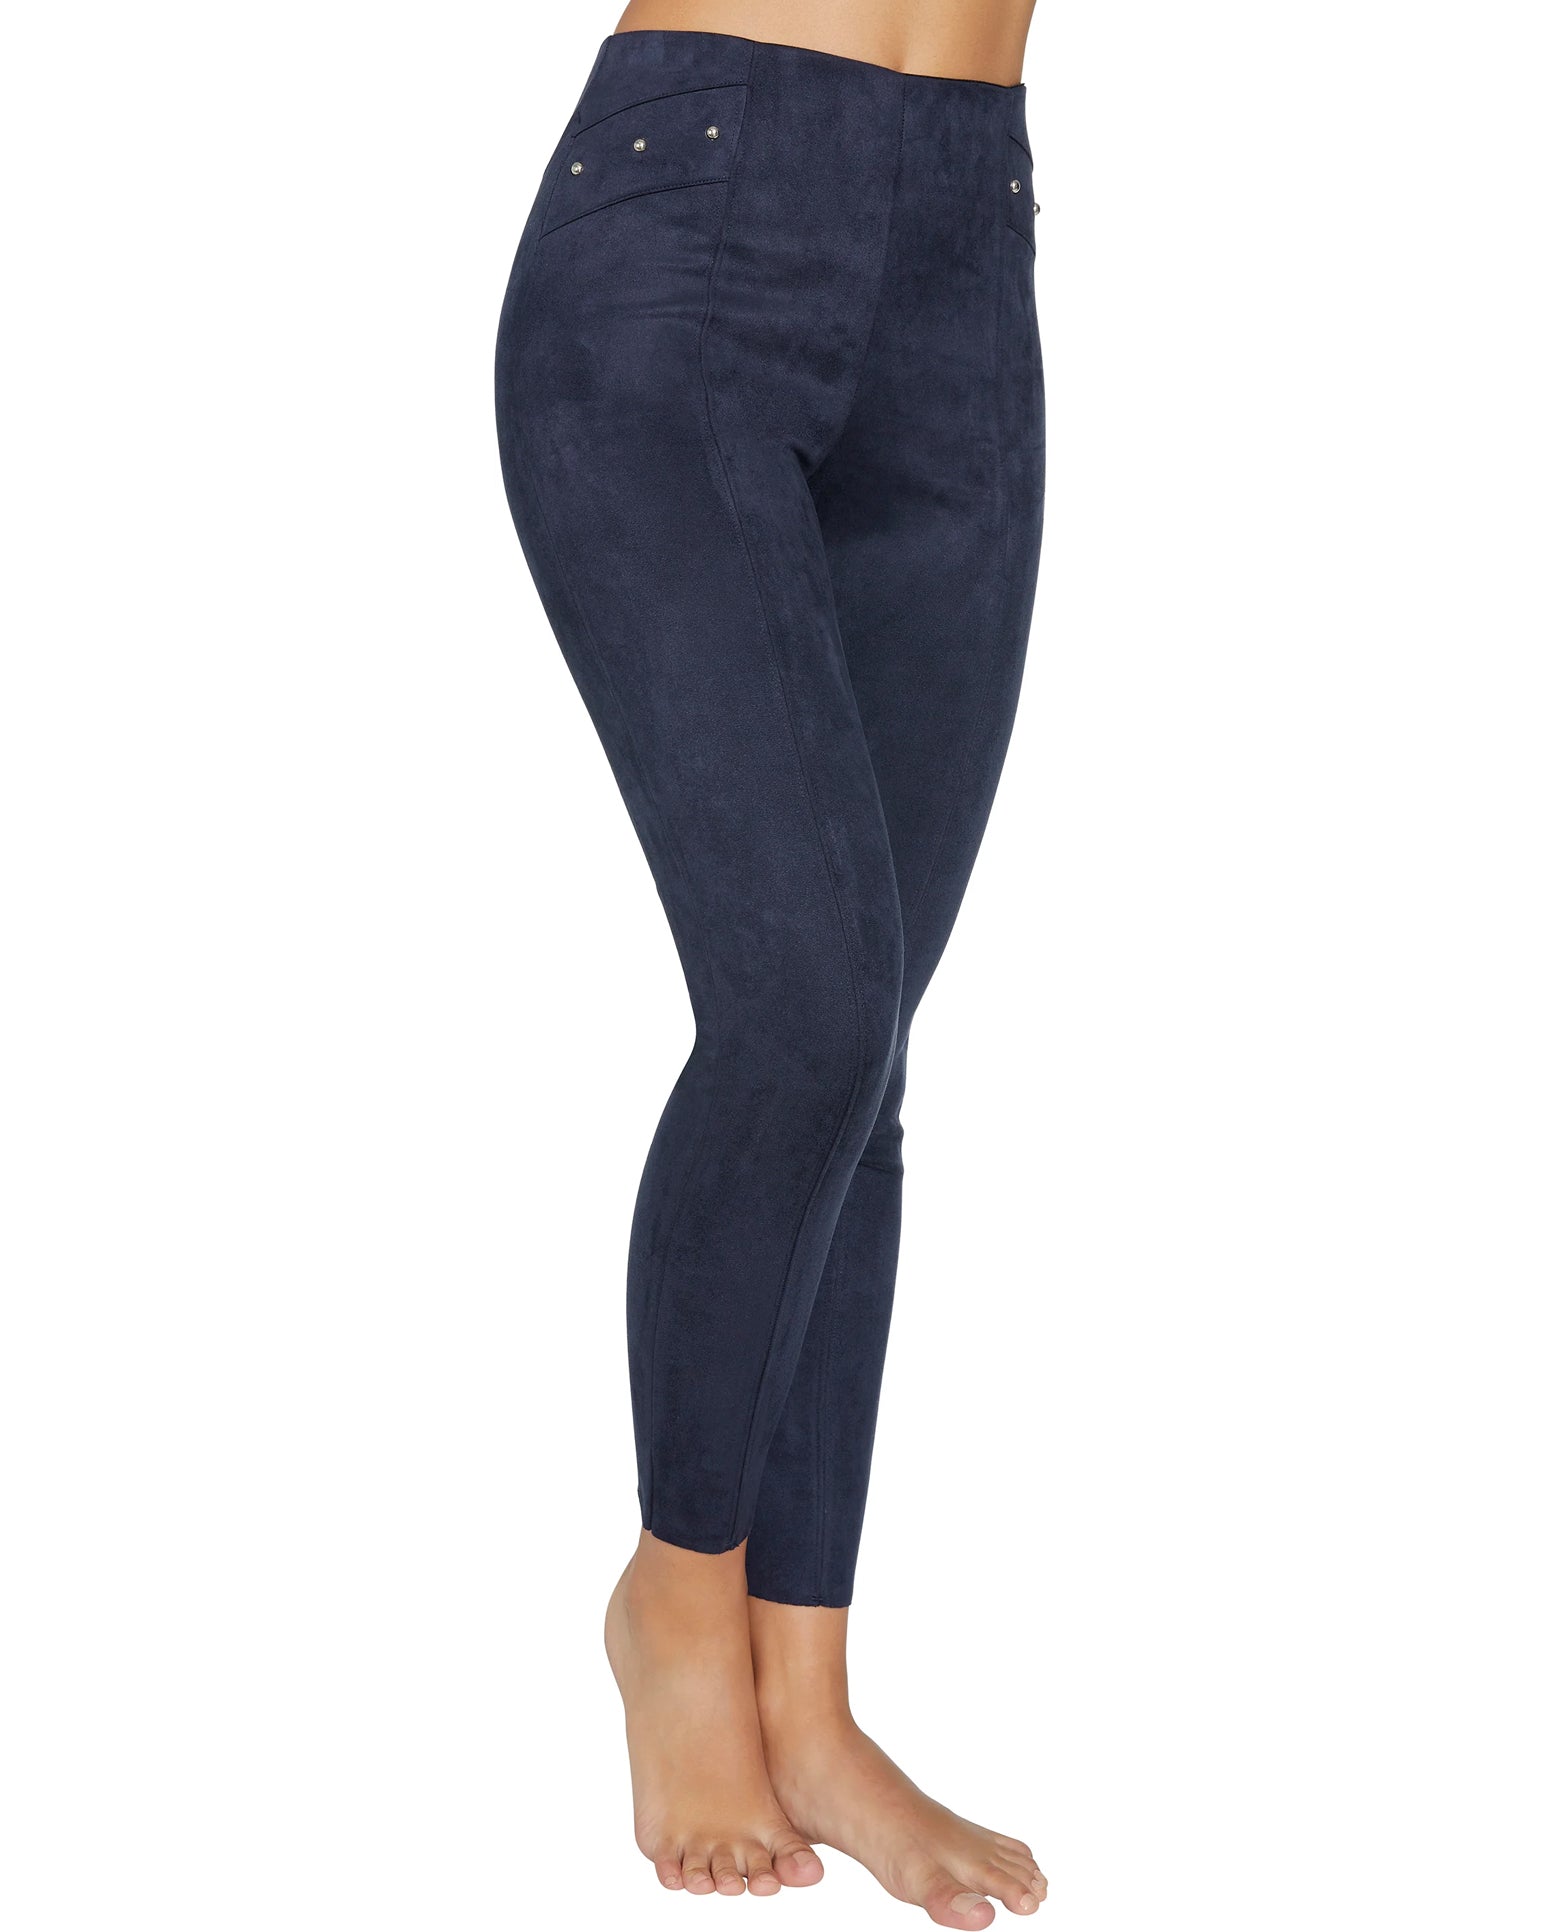 Ysabel Mora 70258 Suede Effect Treggings - navy blue high waist trouser leggings in faux suede with silver studs